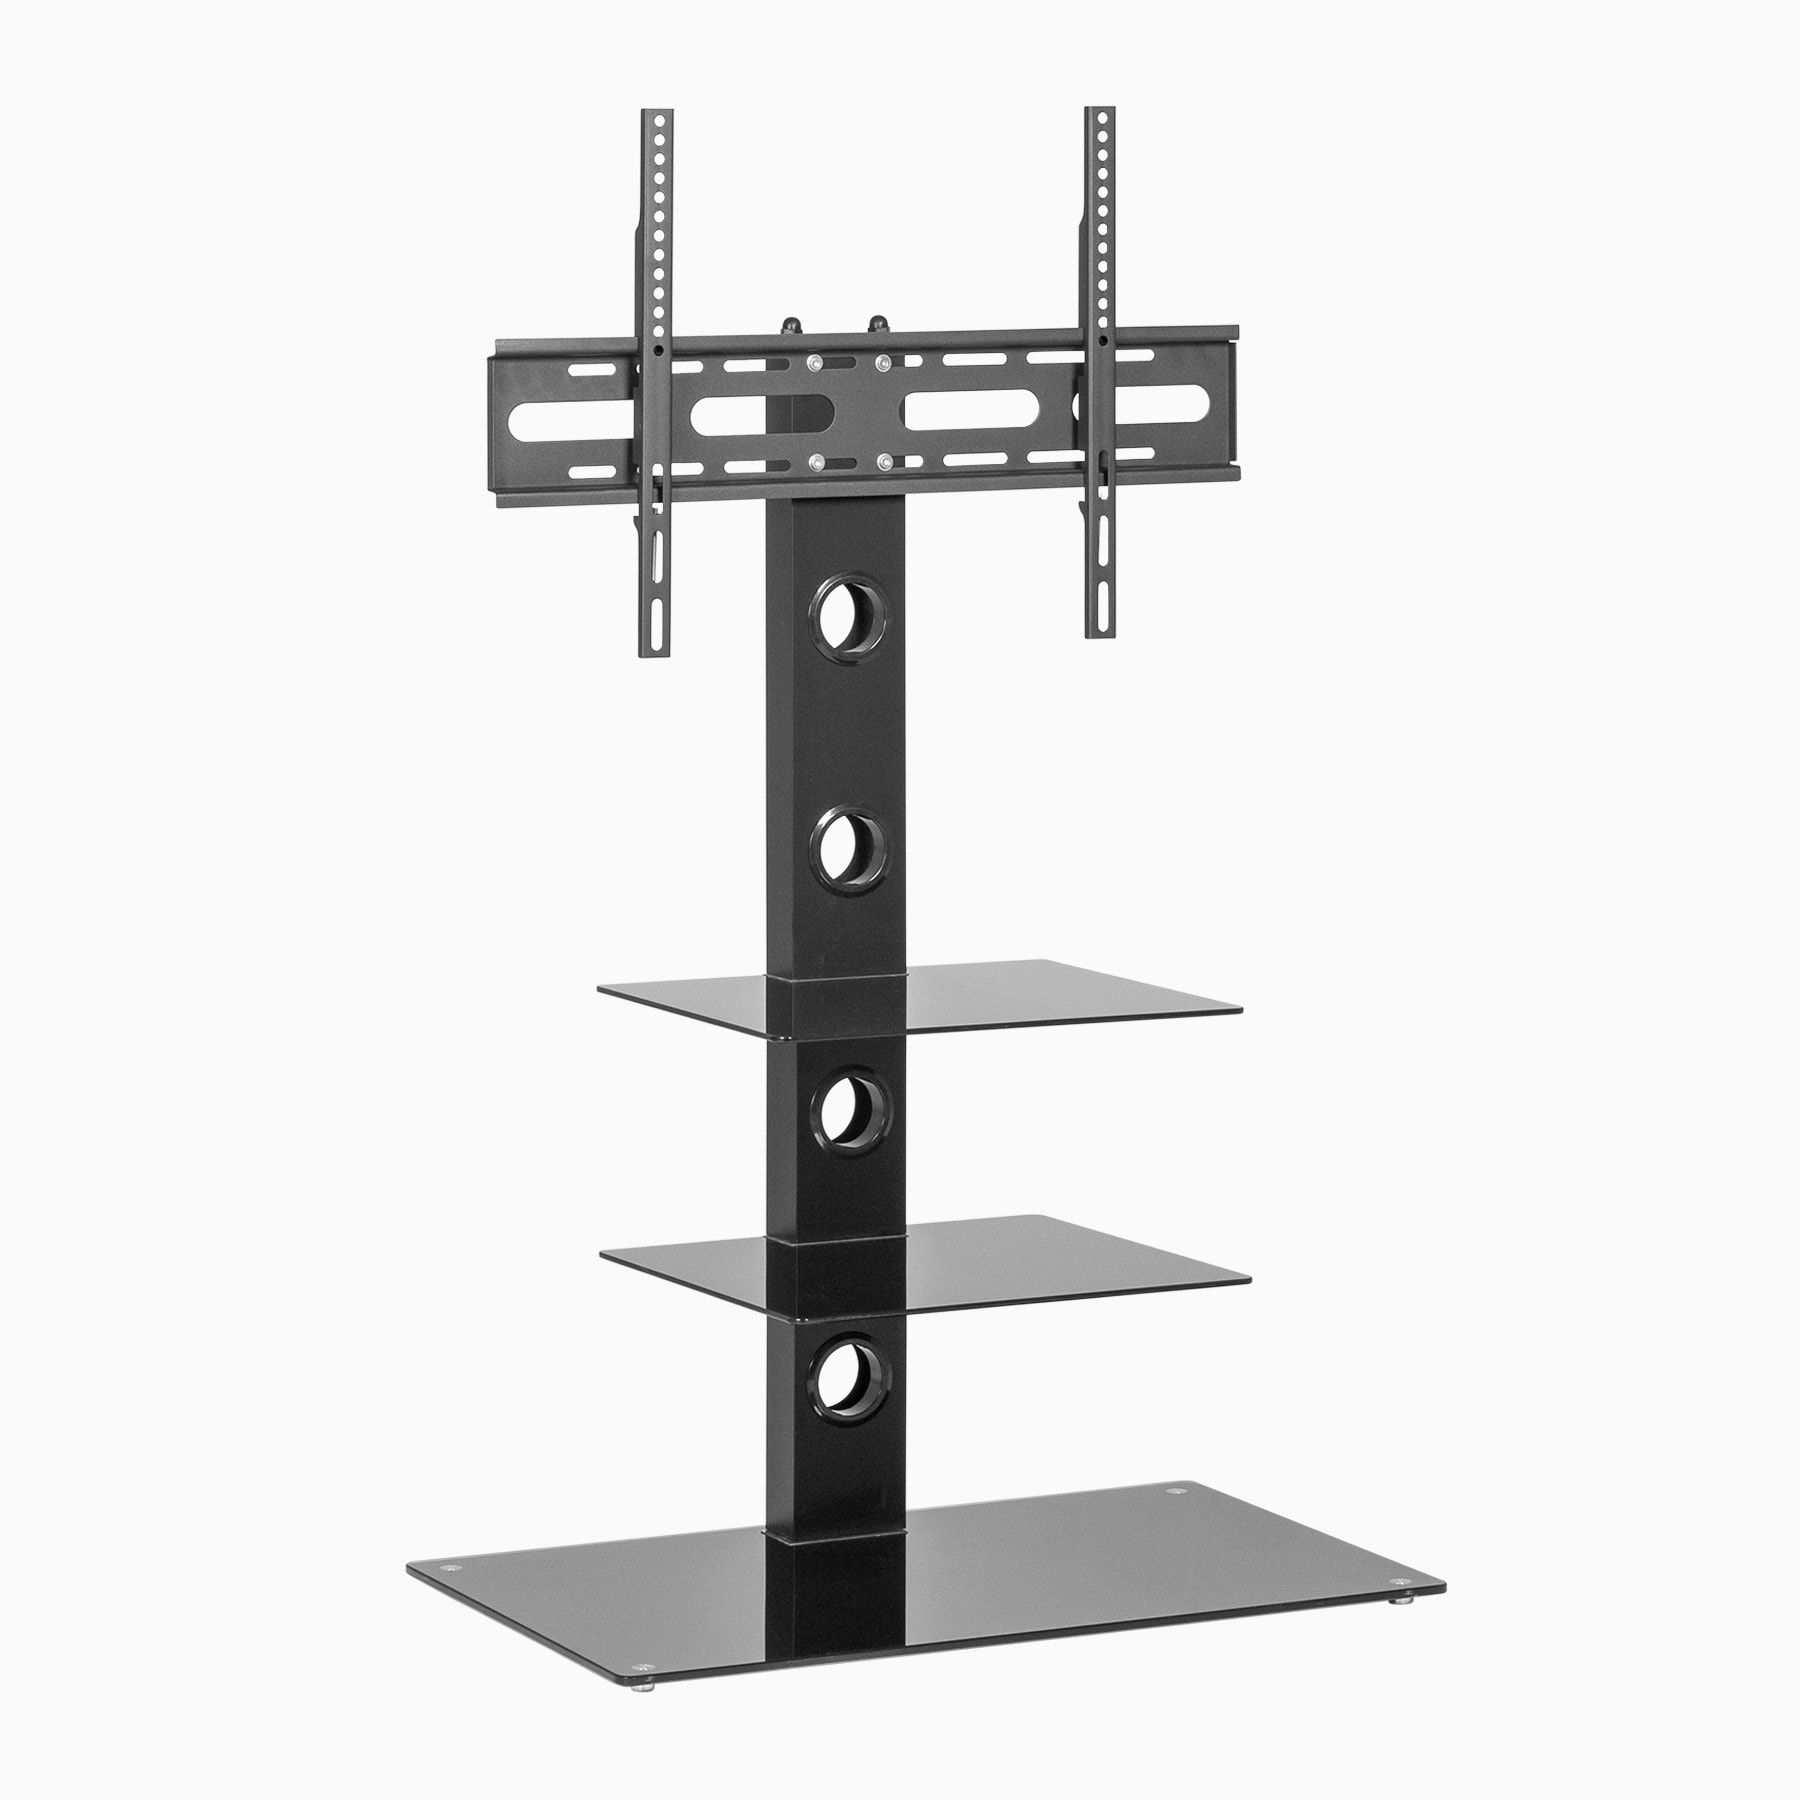 Black Glass Cantilever Tv Stand | Mmt Cbm3 With Regard To Cantilever Tv Stands (View 5 of 15)